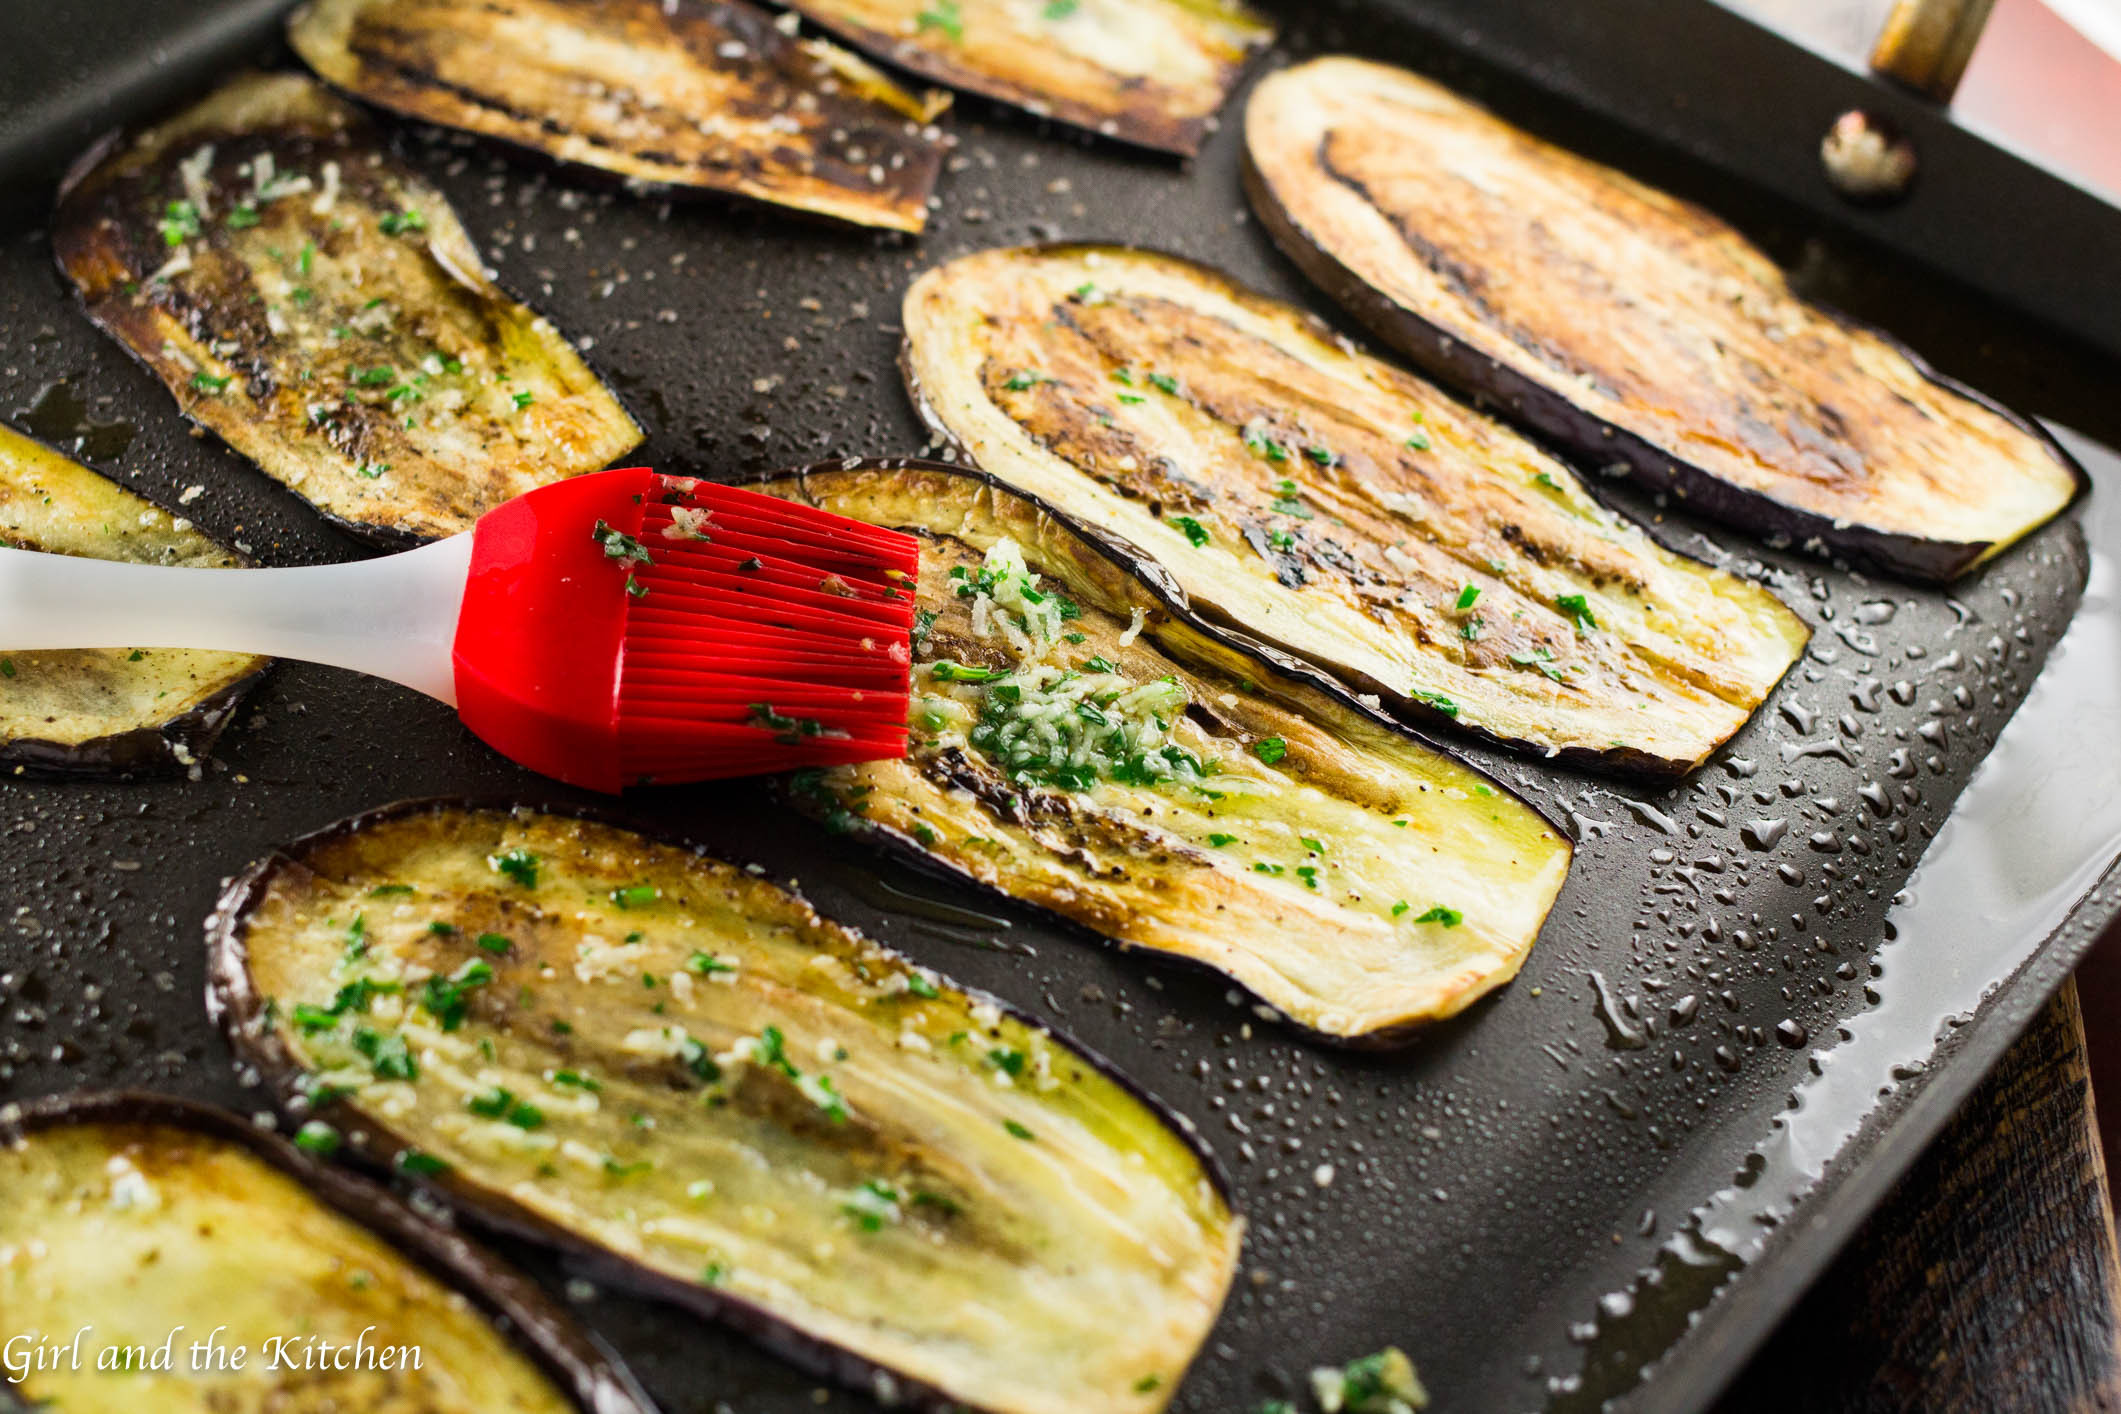 Fried Eggplant Recipes
 Healthy Pan Fried Baby Eggplant with Gremolata Girl and